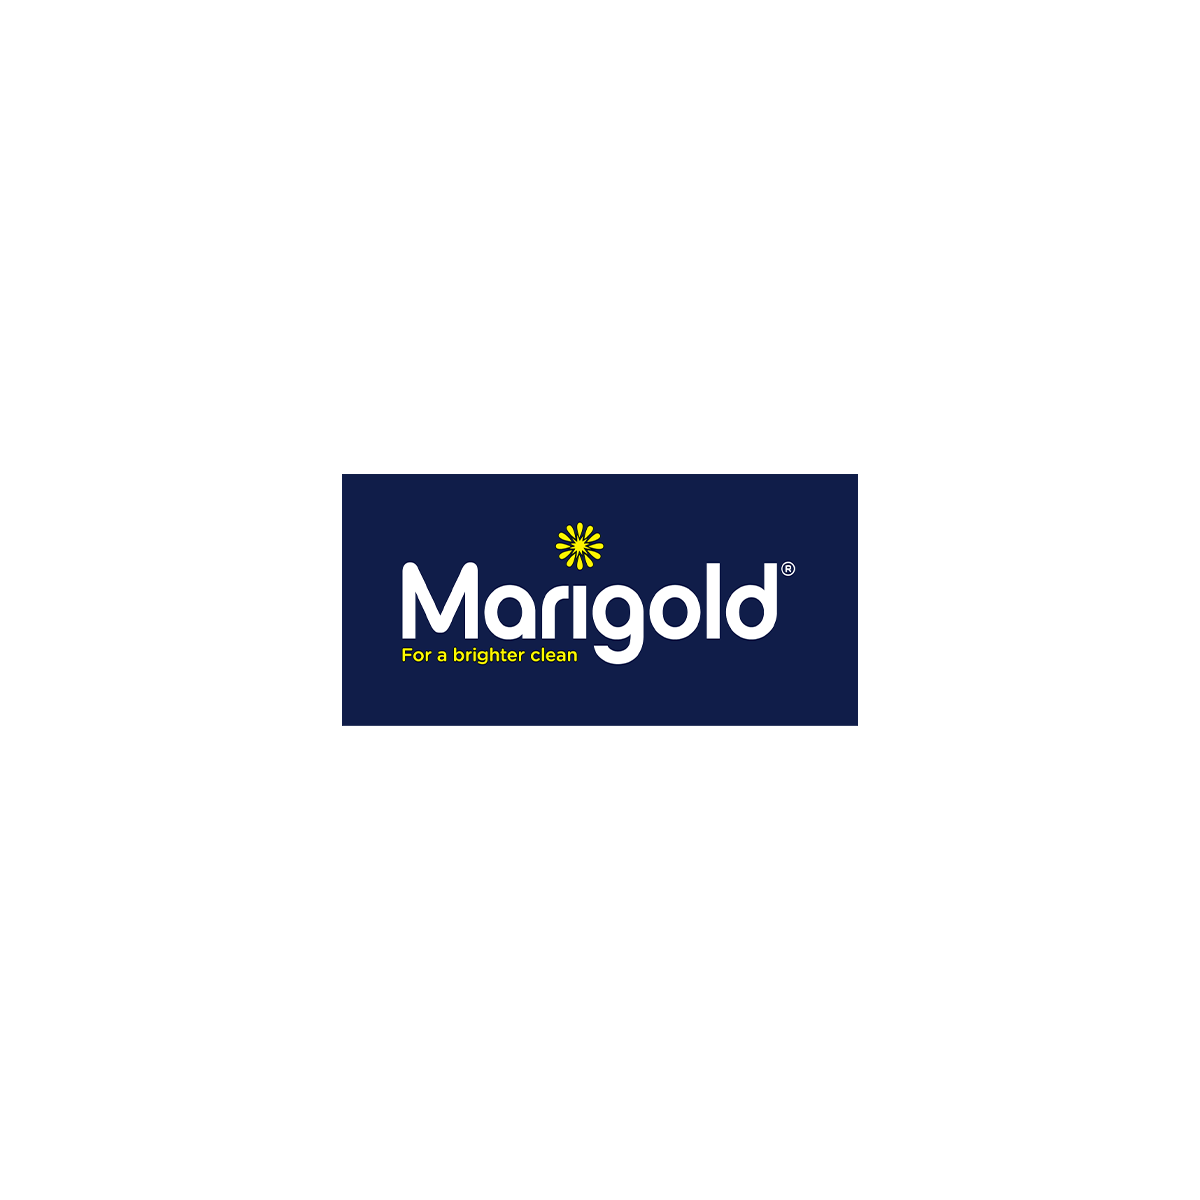 Where to Buy Marigold Products